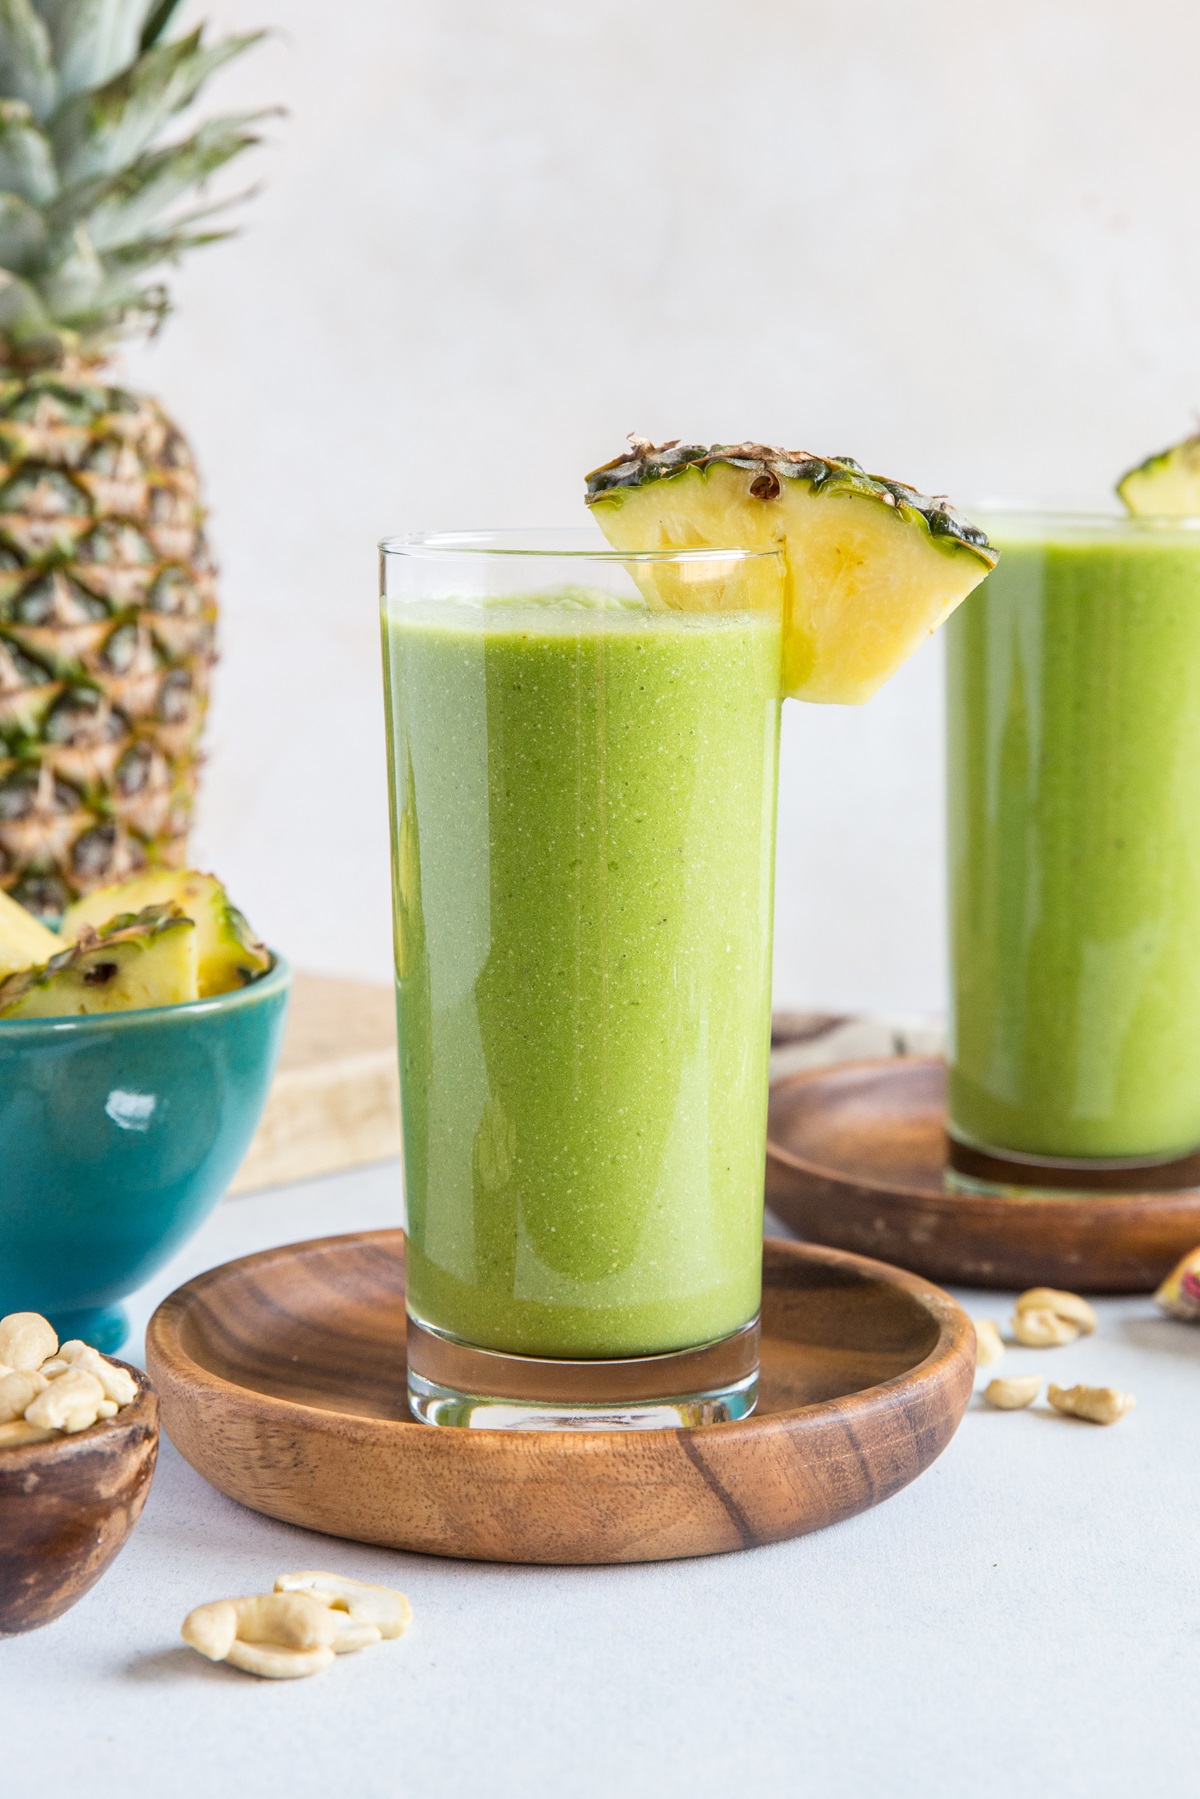 Pineapple Green Protein Smoothie - made banana-free with steamed cauliflower and packed with plant-based protein for a healthy breakfast